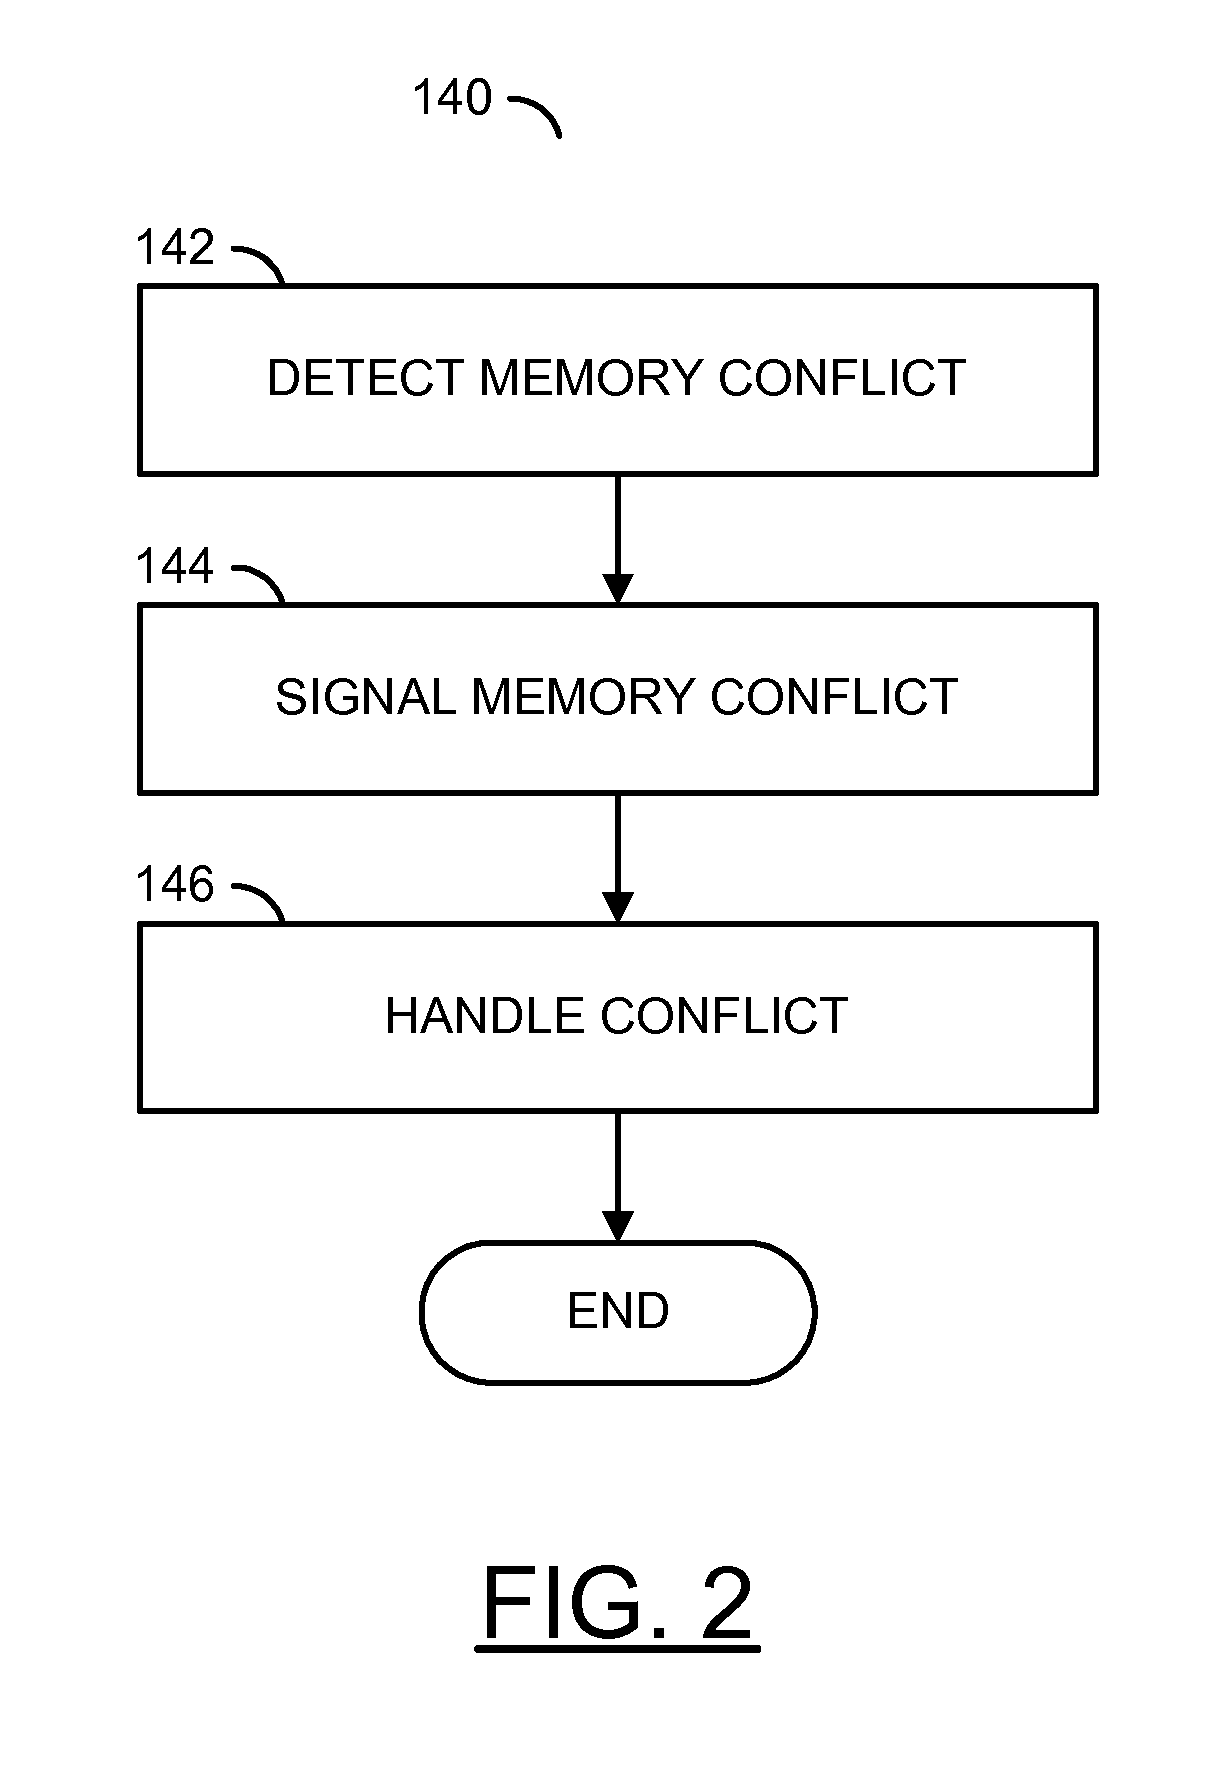 Memory conflicts learning capability